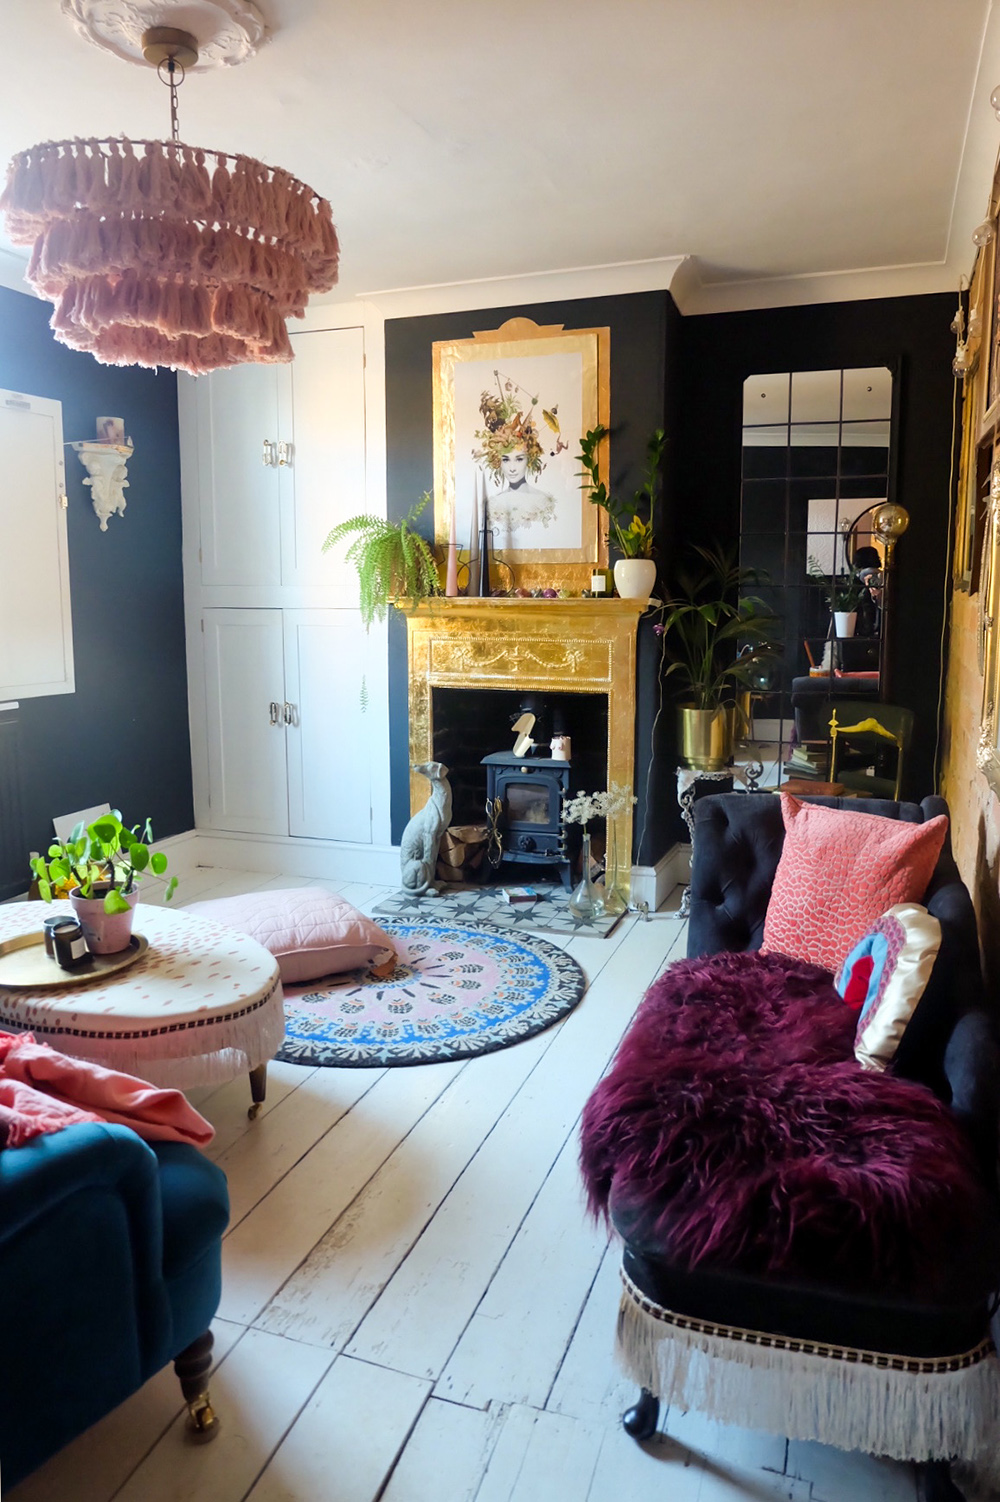 Before and after - eclectic living room decor with black walls and gold fireplace.